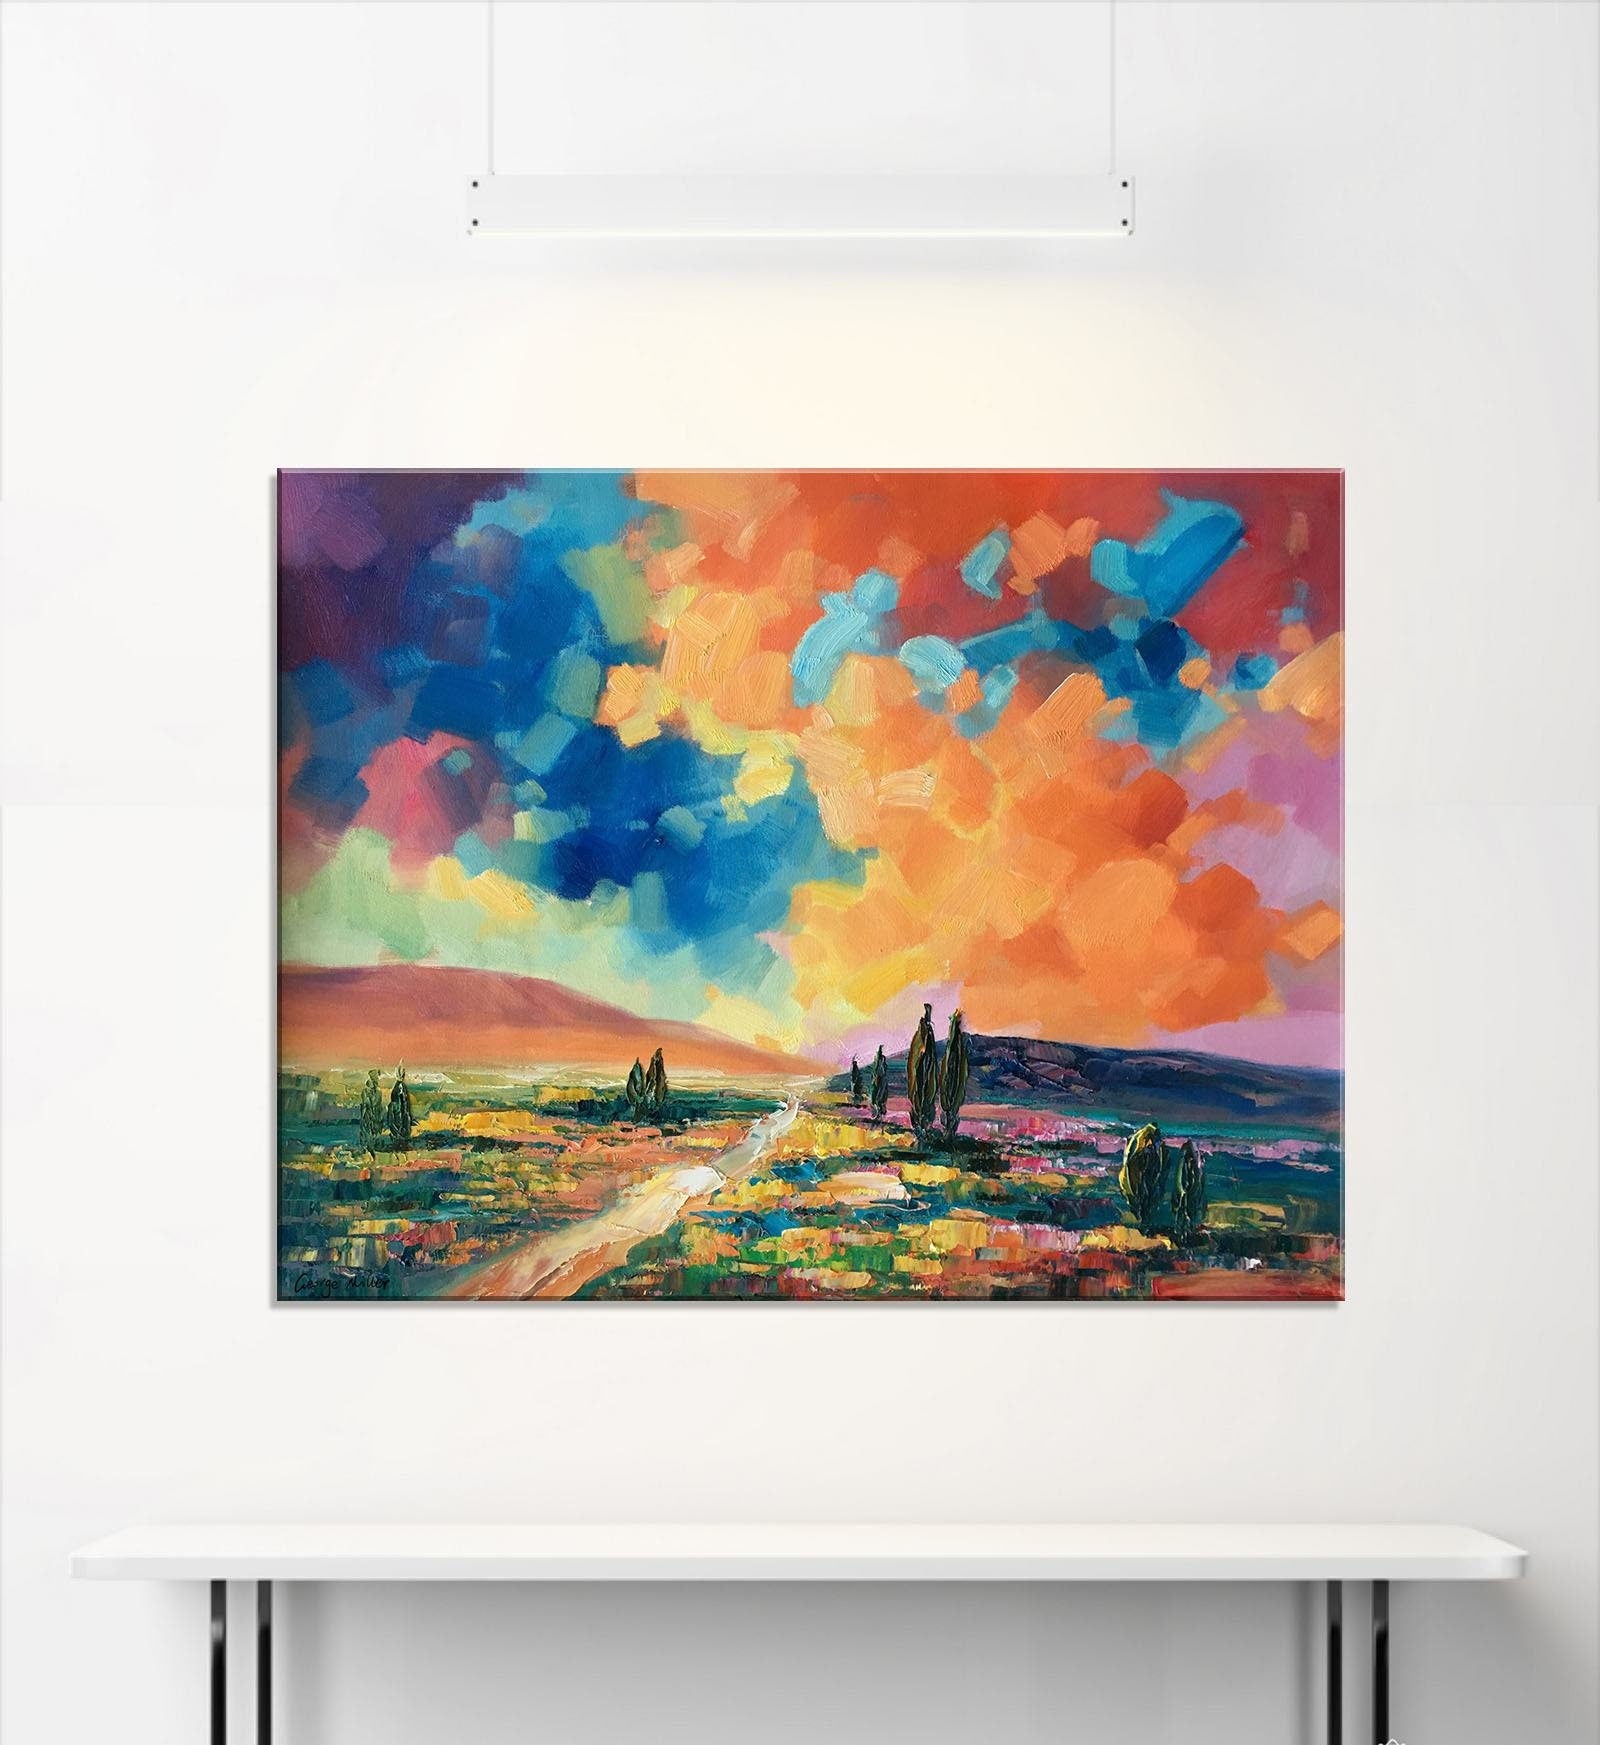 Original Landscape Oil Paintings: Large Abstract Art for Living Room | 32x40 inches - Large Abstract Painting, Canvas Wall Decor